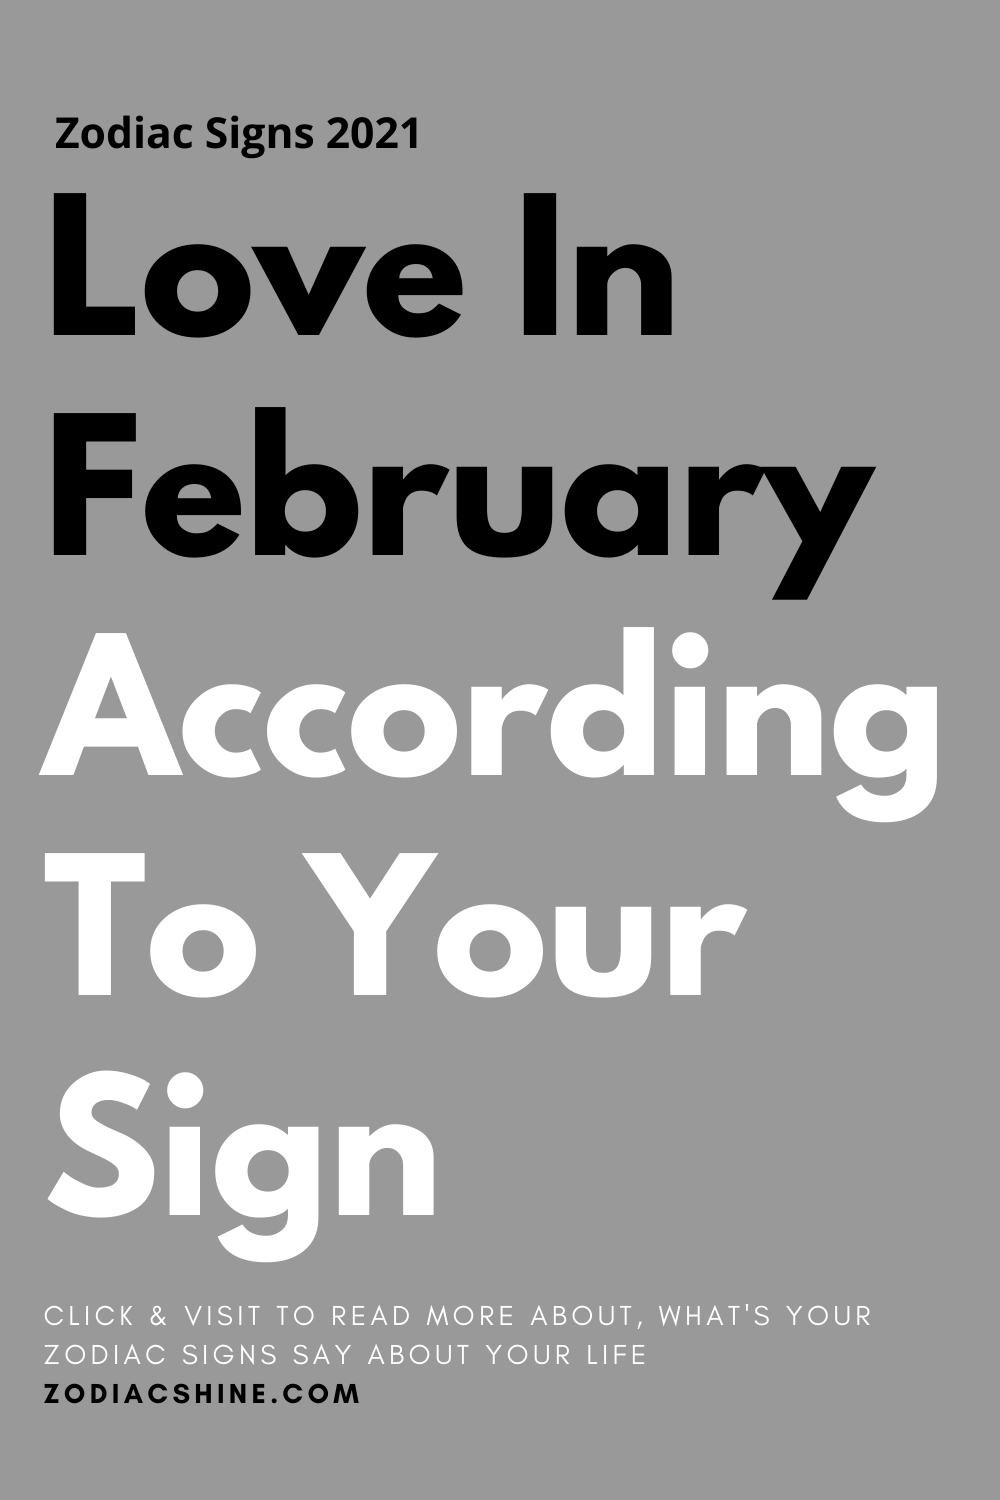 Love In February According To Your Sign